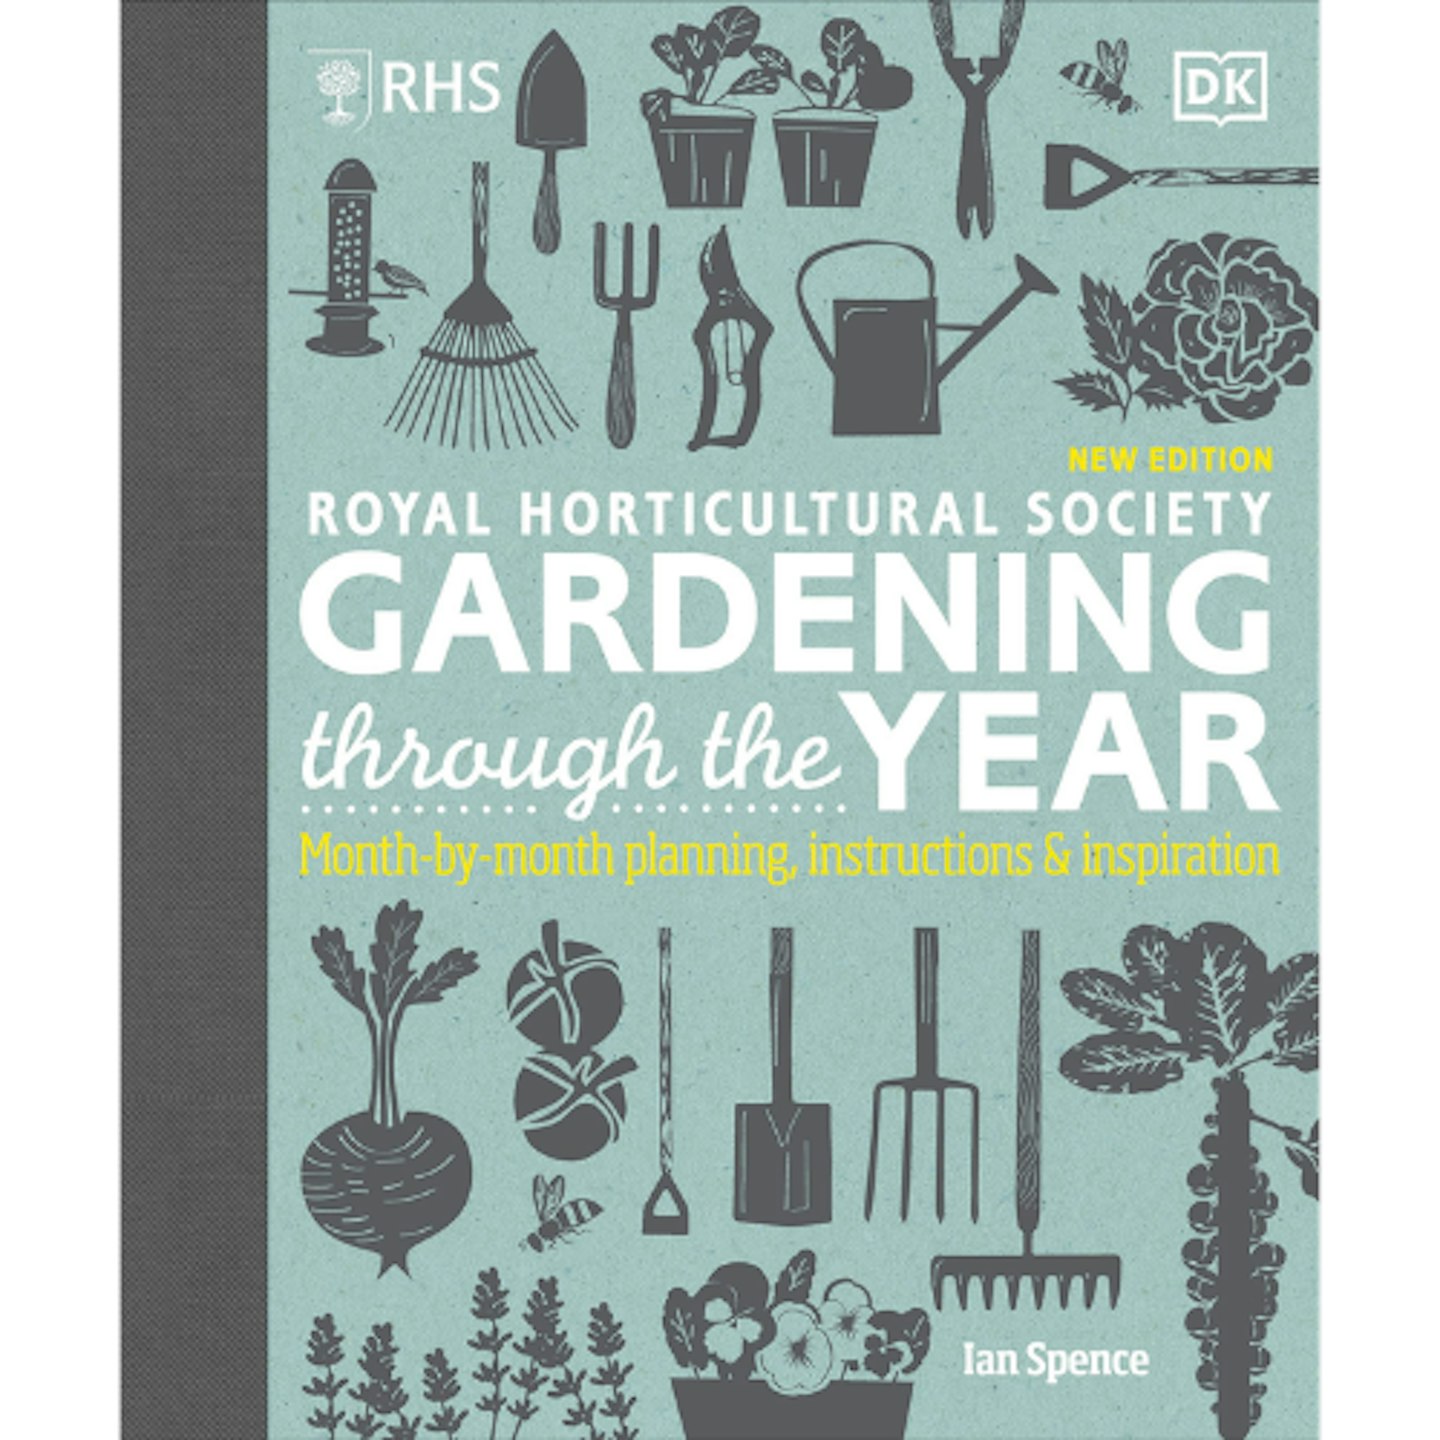 RHS Gardening Through the Year by Ian Spence